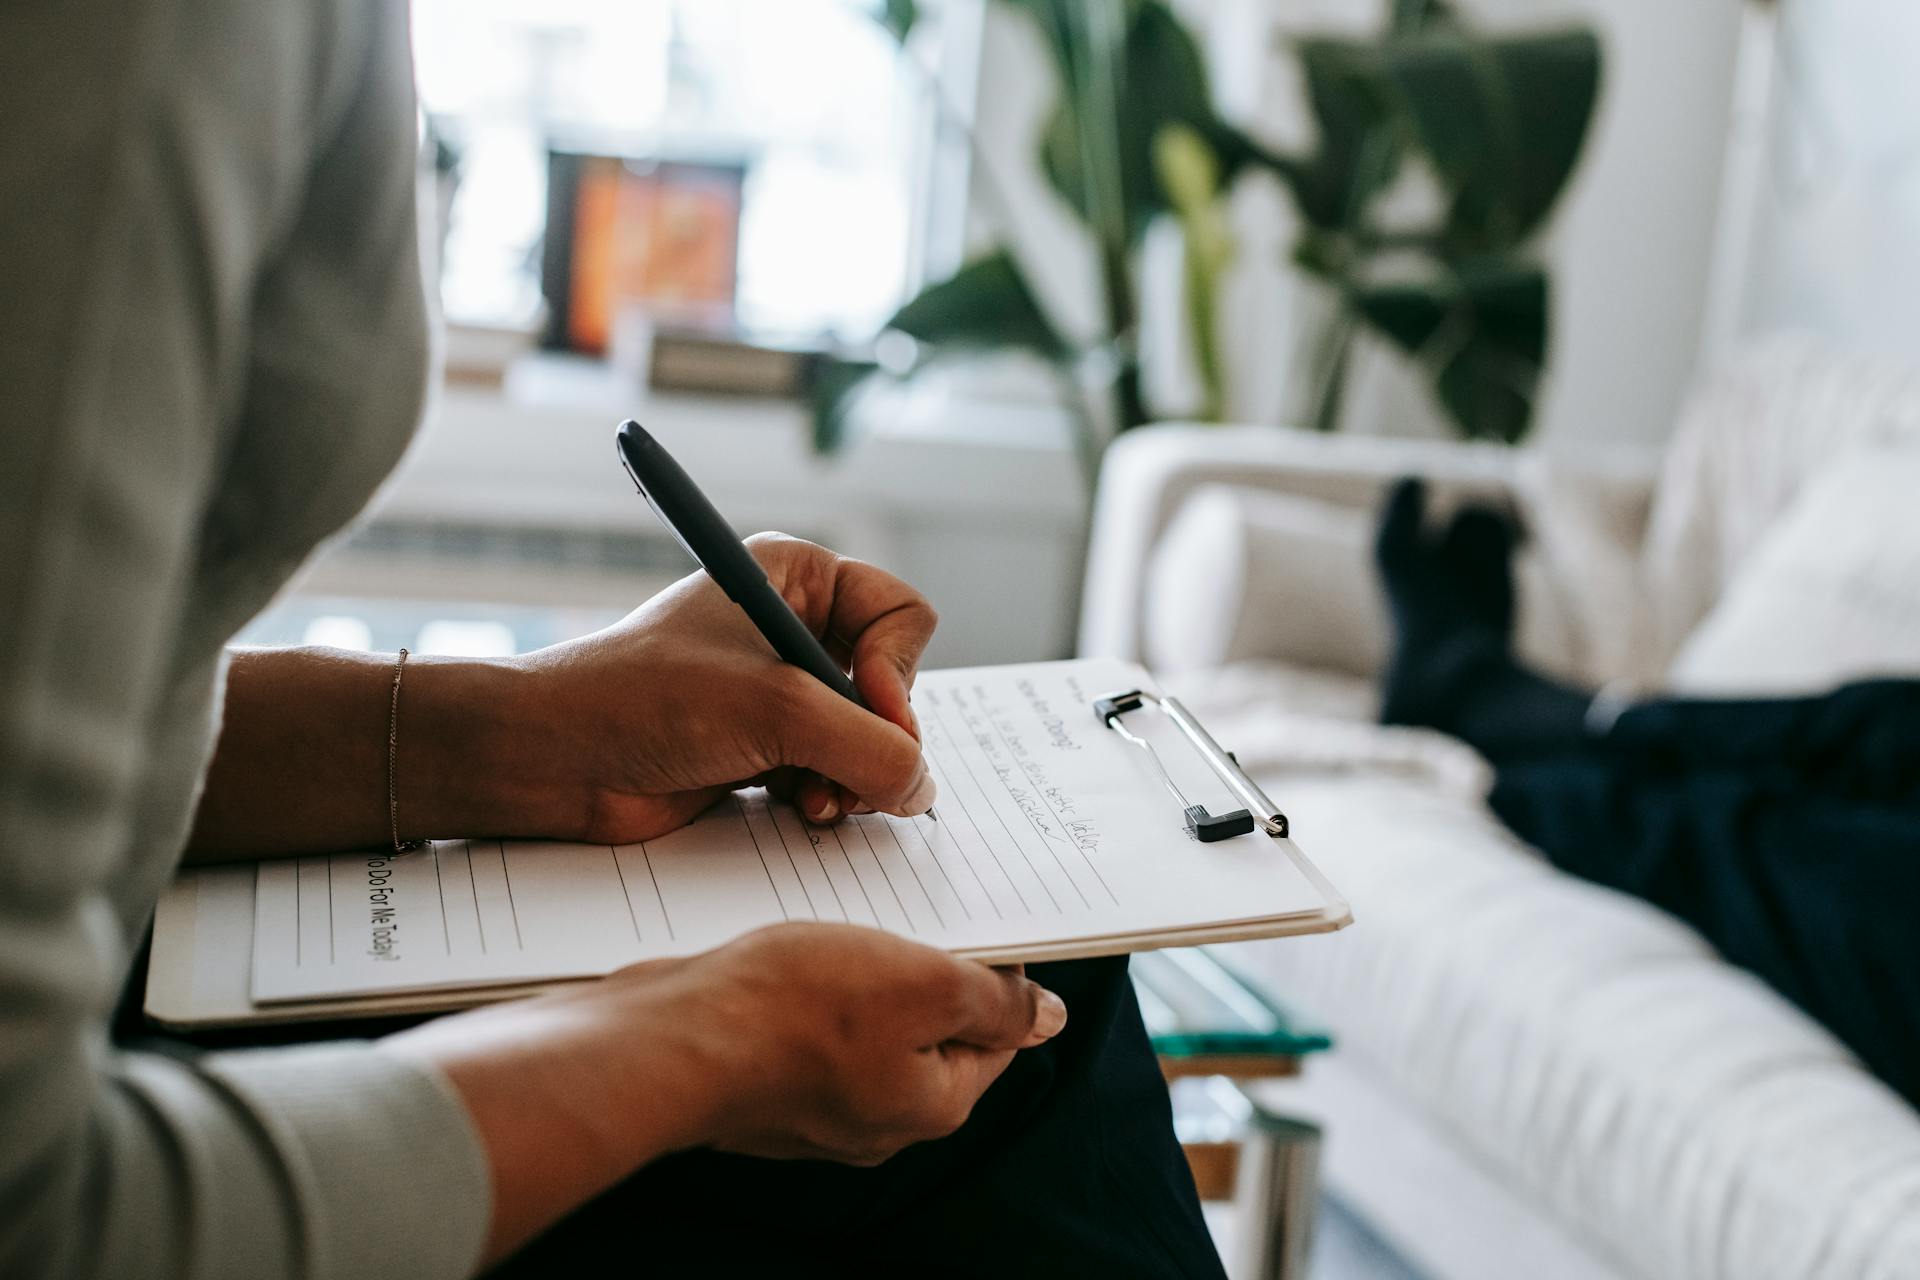 A person writing notes during a therapy session | Source: Pexels